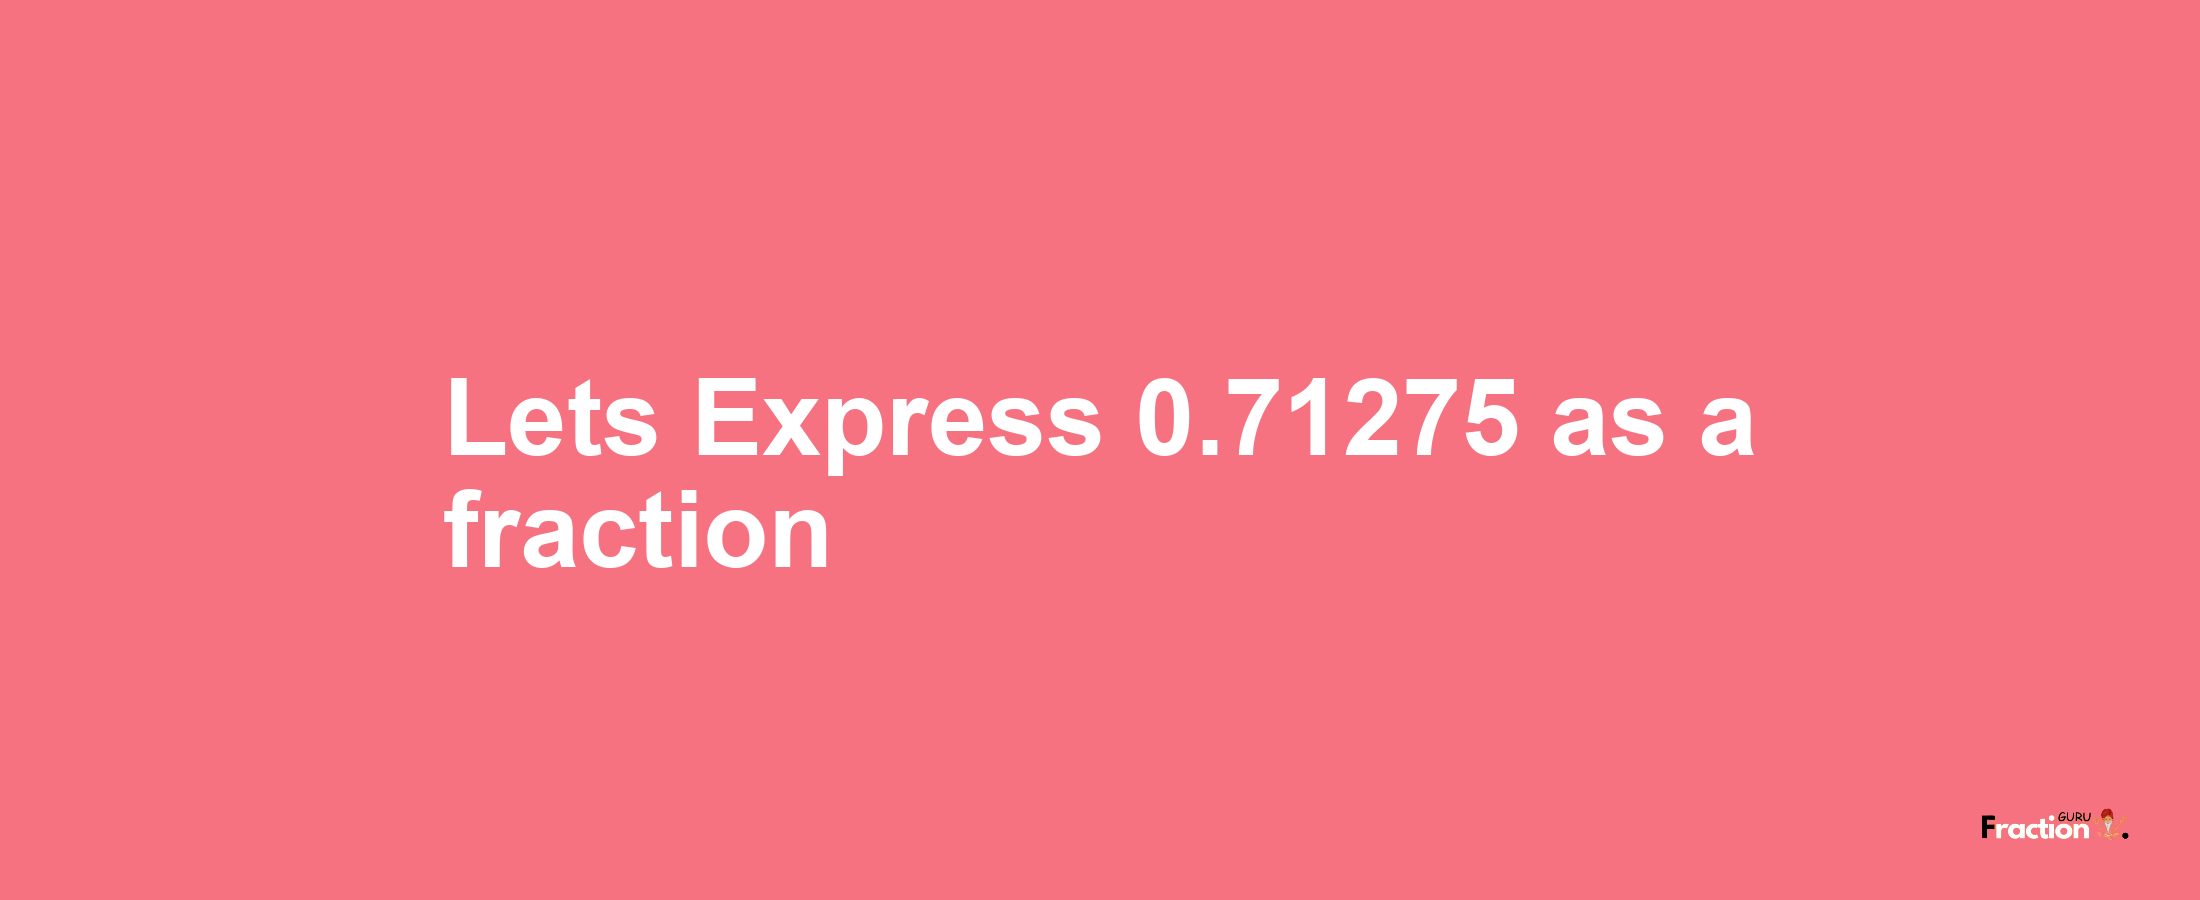 Lets Express 0.71275 as afraction